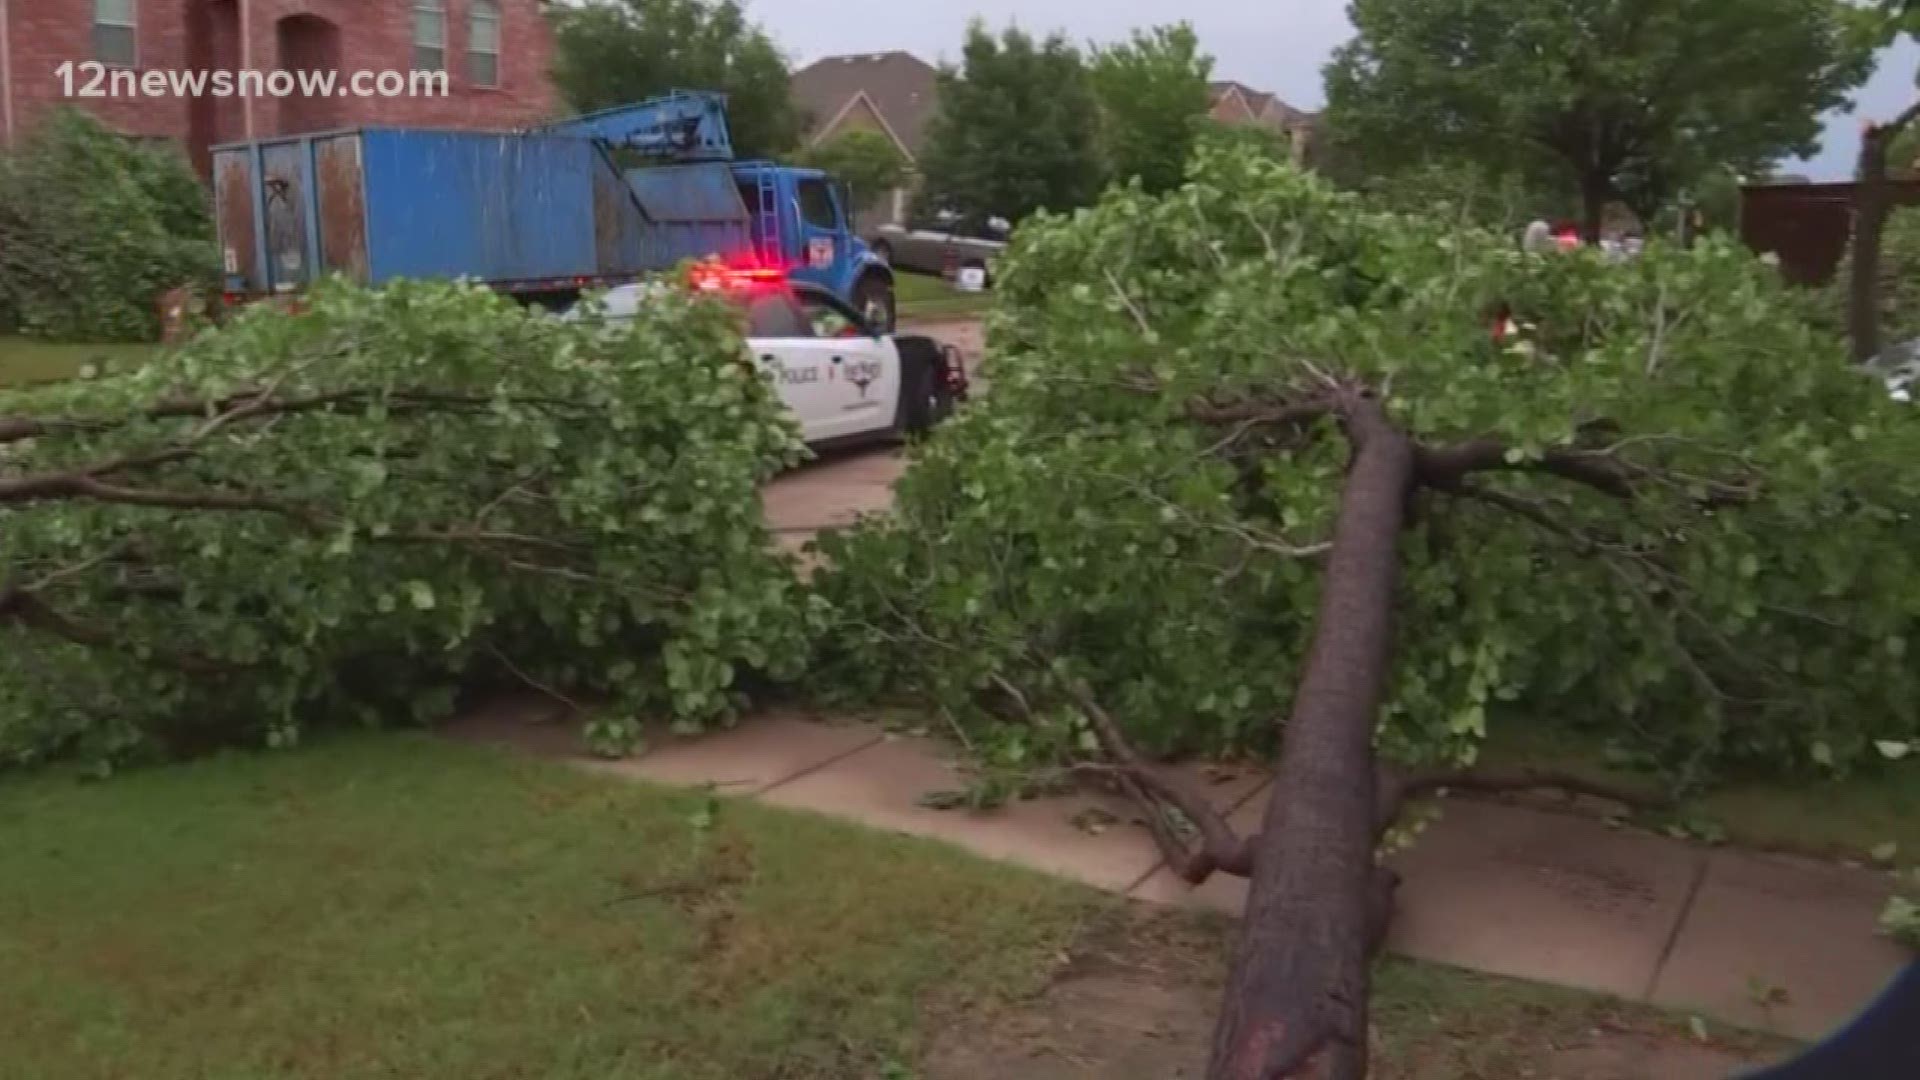 Storms left a path of damage across North Texas Sunday. Several homes in Arlington had some major damage as a result of the storm.